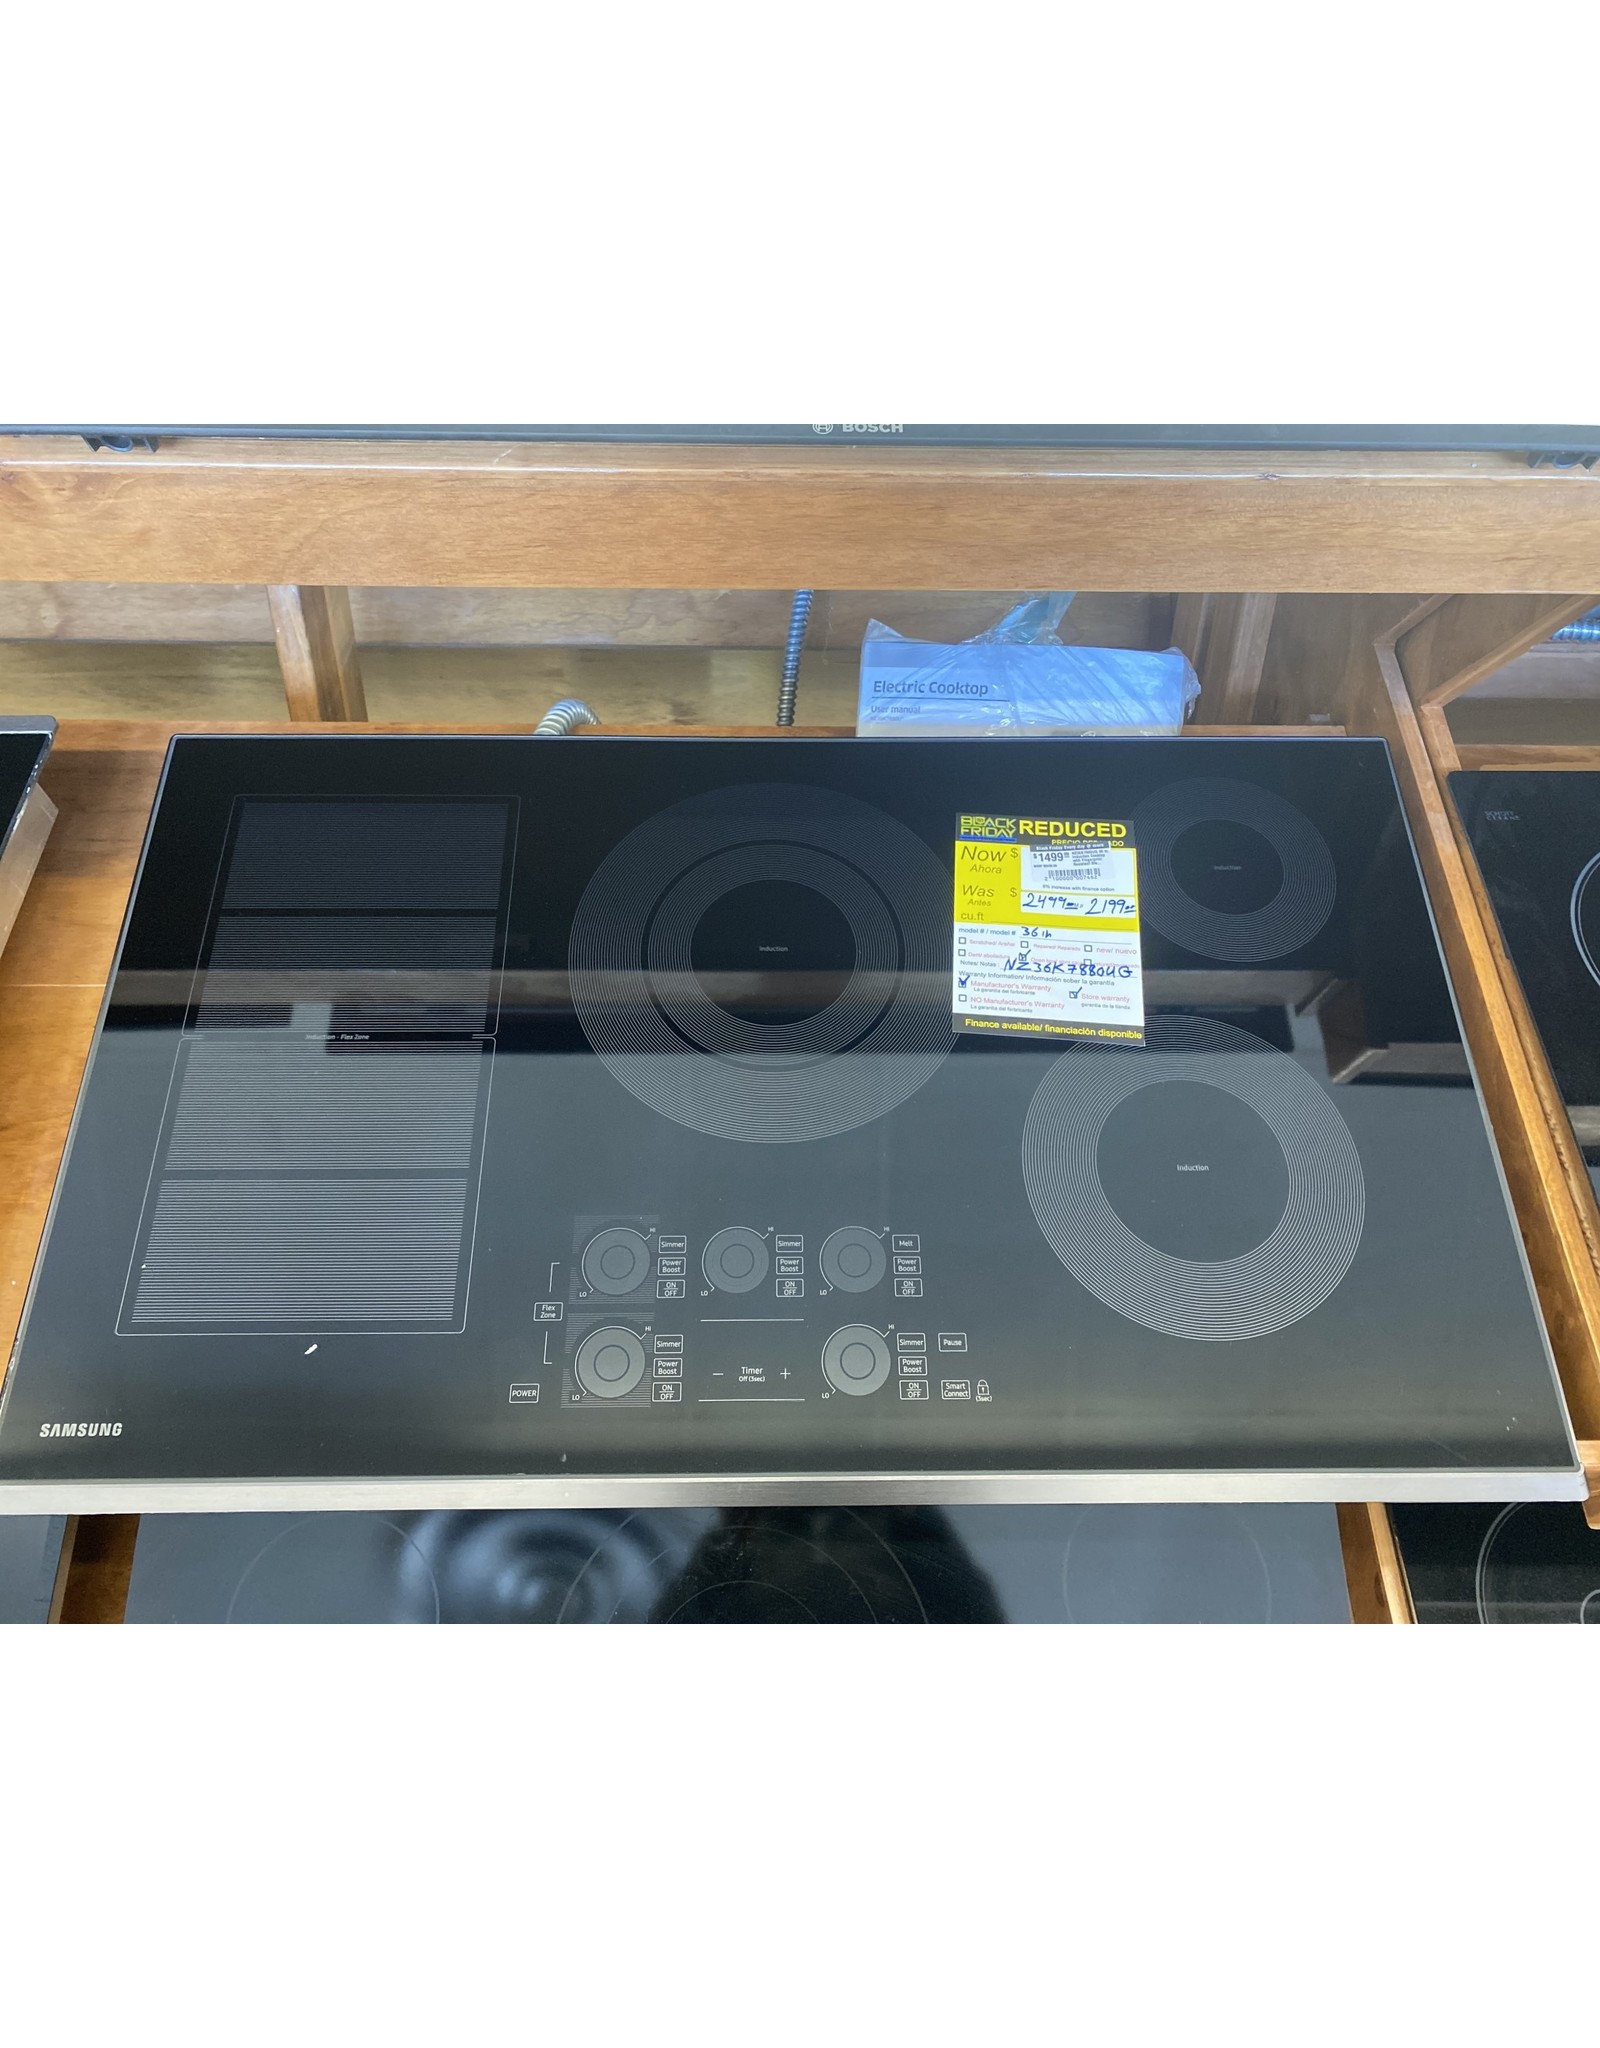 SAMSUNG NZ36K7880UG 36 in. Induction Cooktop with Fingerprint Resistant Black Stainless Trim with 5 Elements and Flex Zone Element36 in. Induction Cooktop with Fingerprint Resistant Black Stainless Trim with 5 Elements and Flex Zone Element